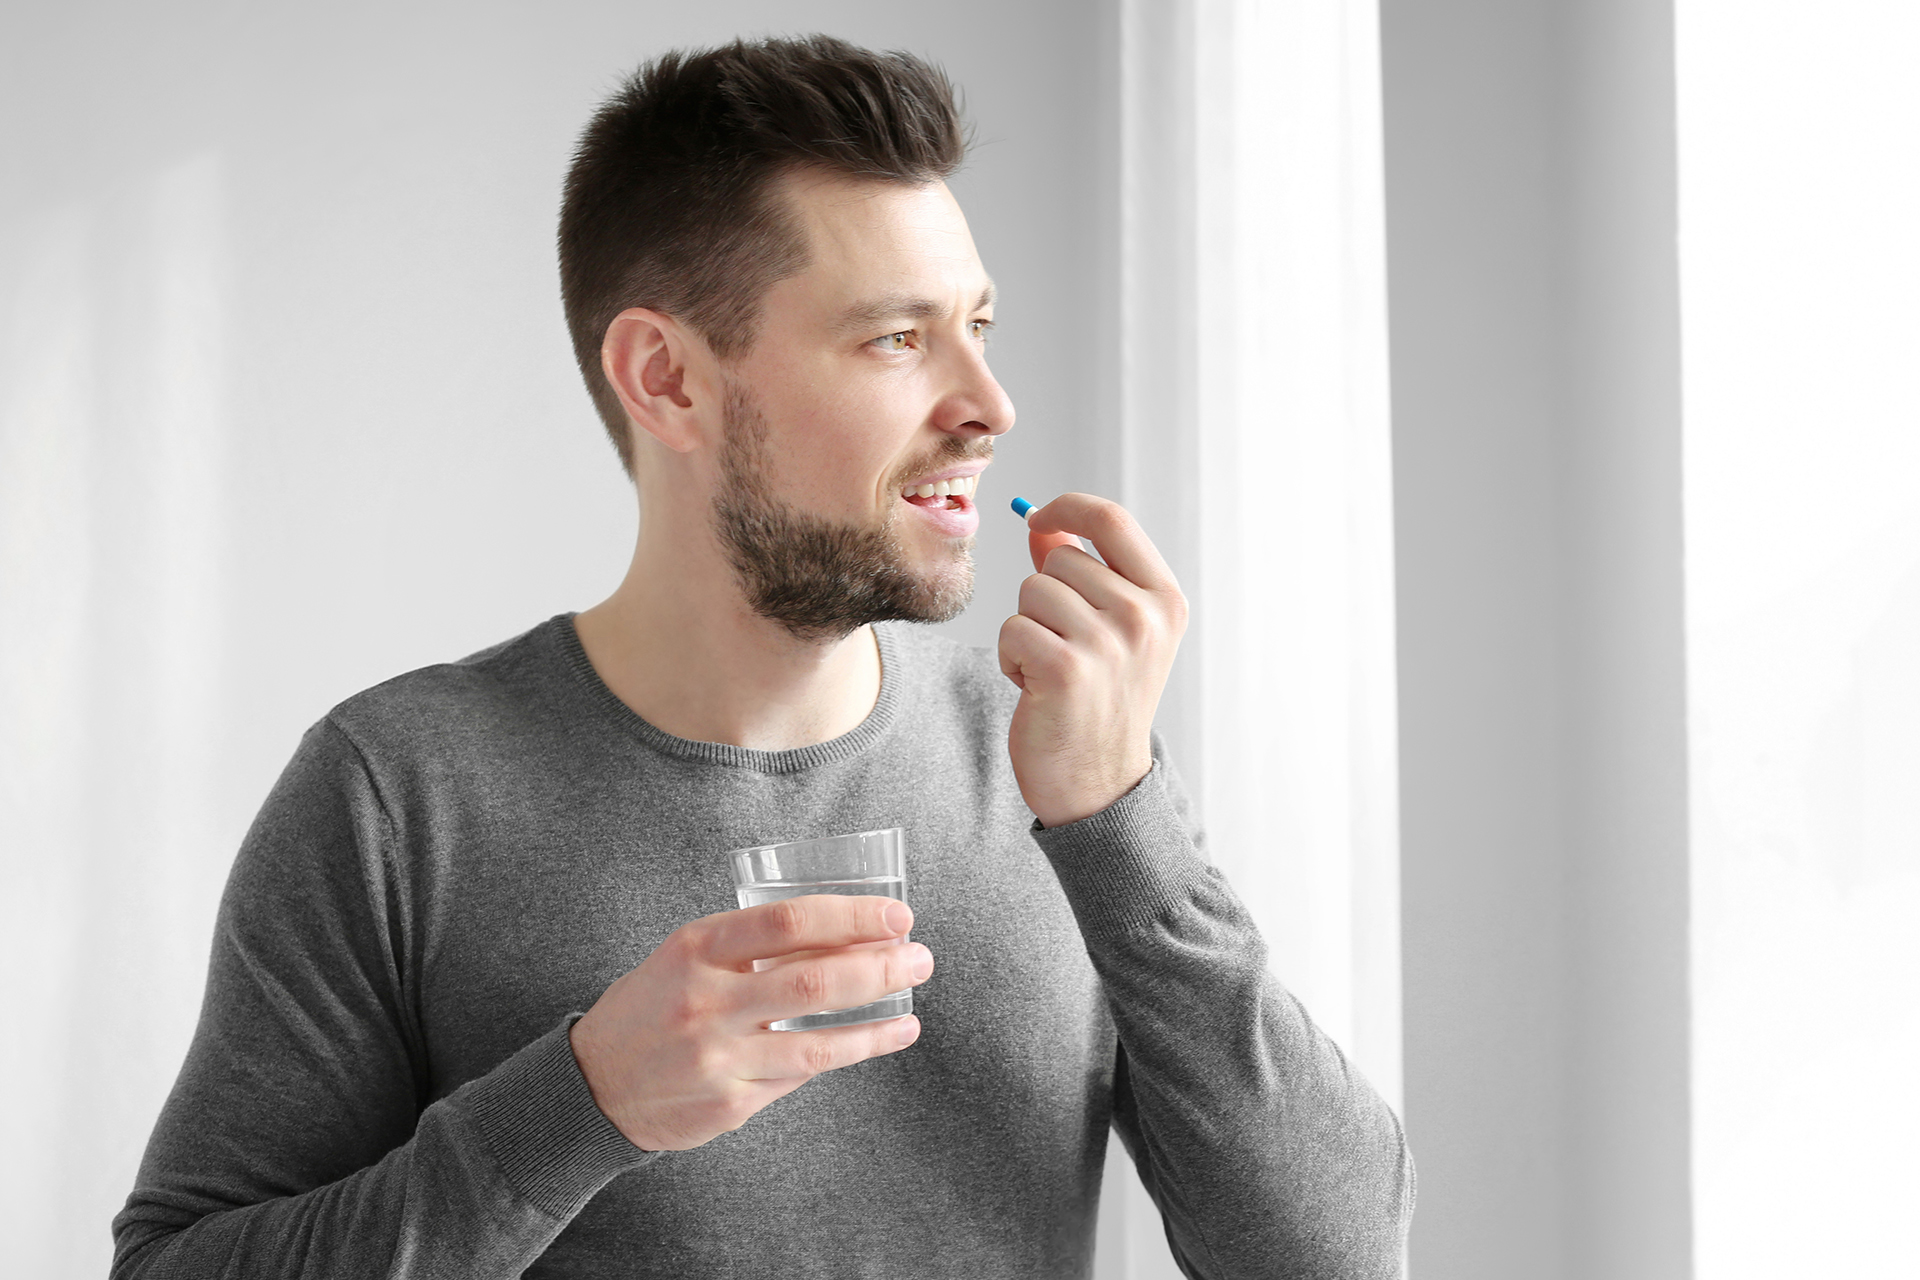 eds - Male taking pill with glass of water in hand.